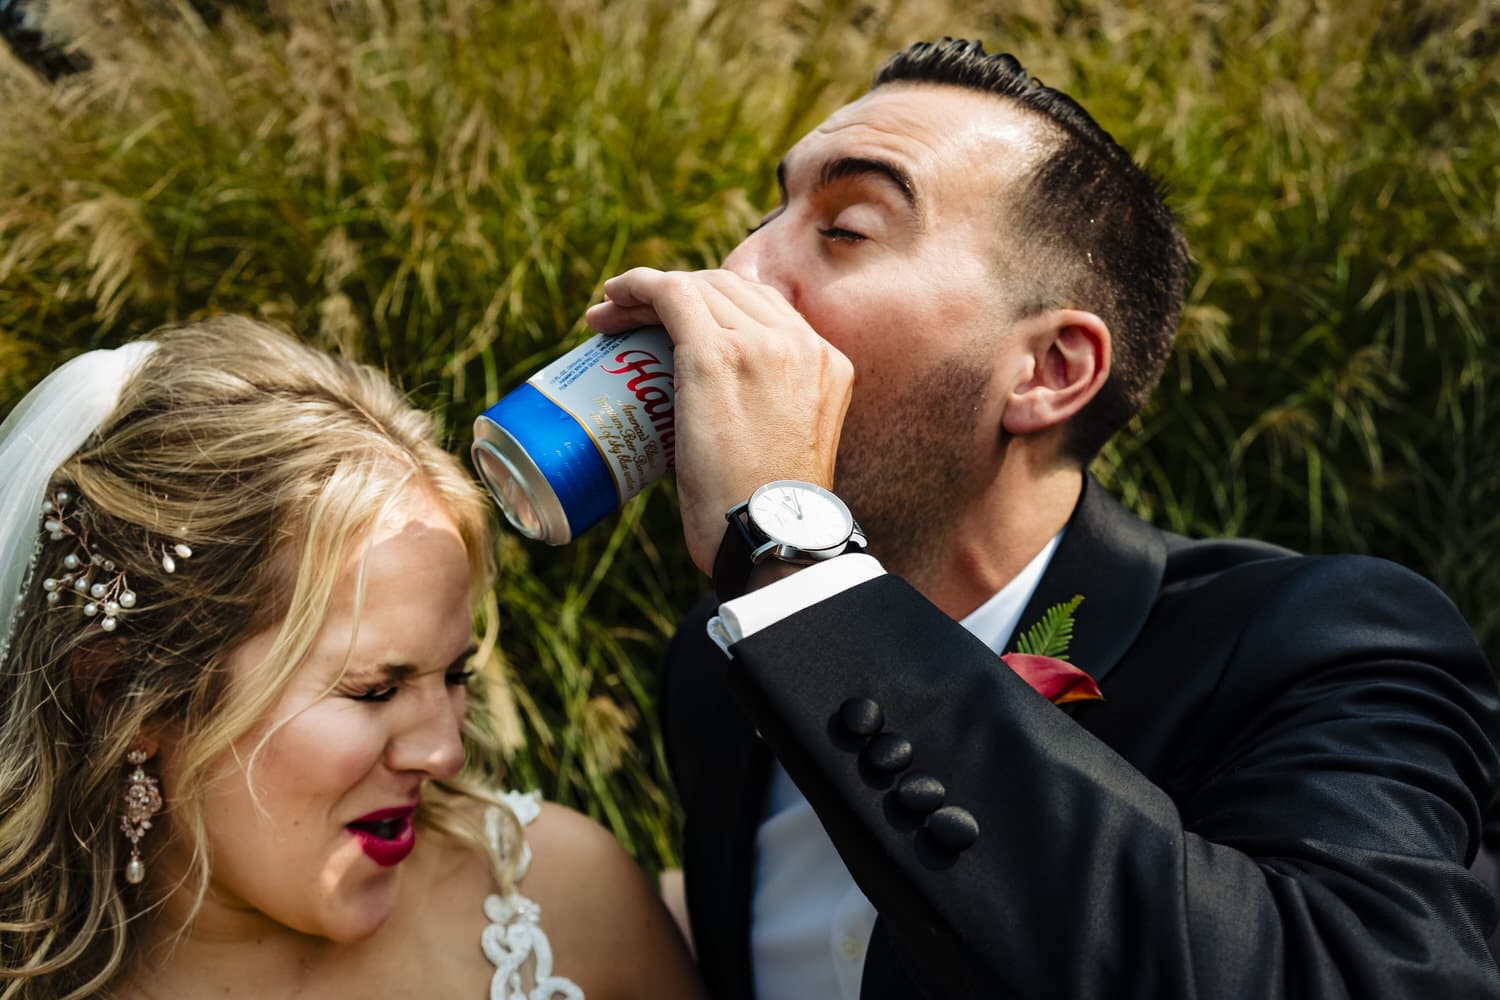 A colorful, candid picture of a man drinking a can of Hams as it drips sweat on to his bride on their summer wedding day. 